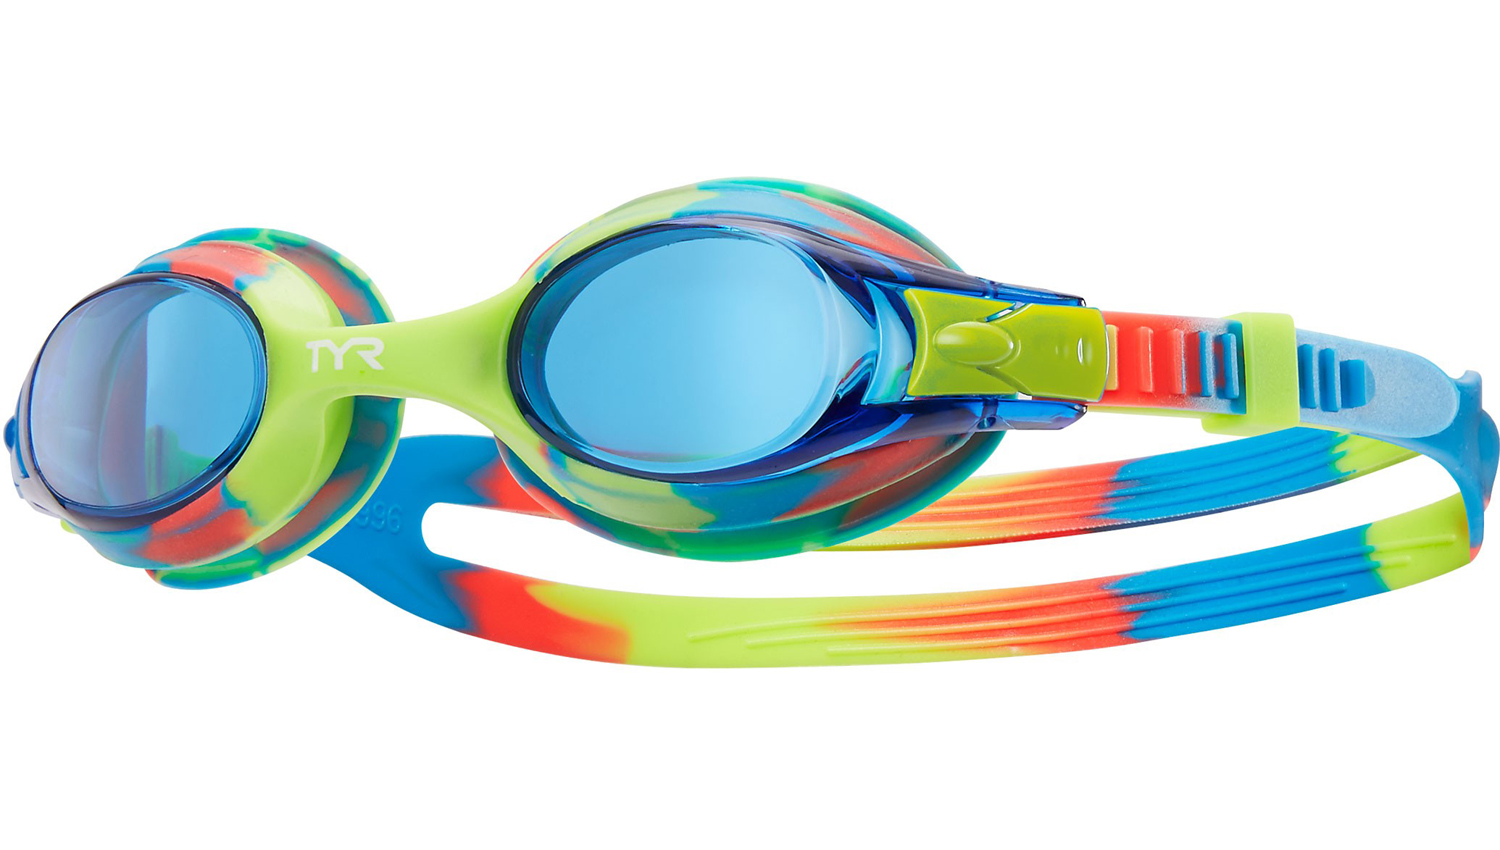 
The Best Swim Goggles for Kids
